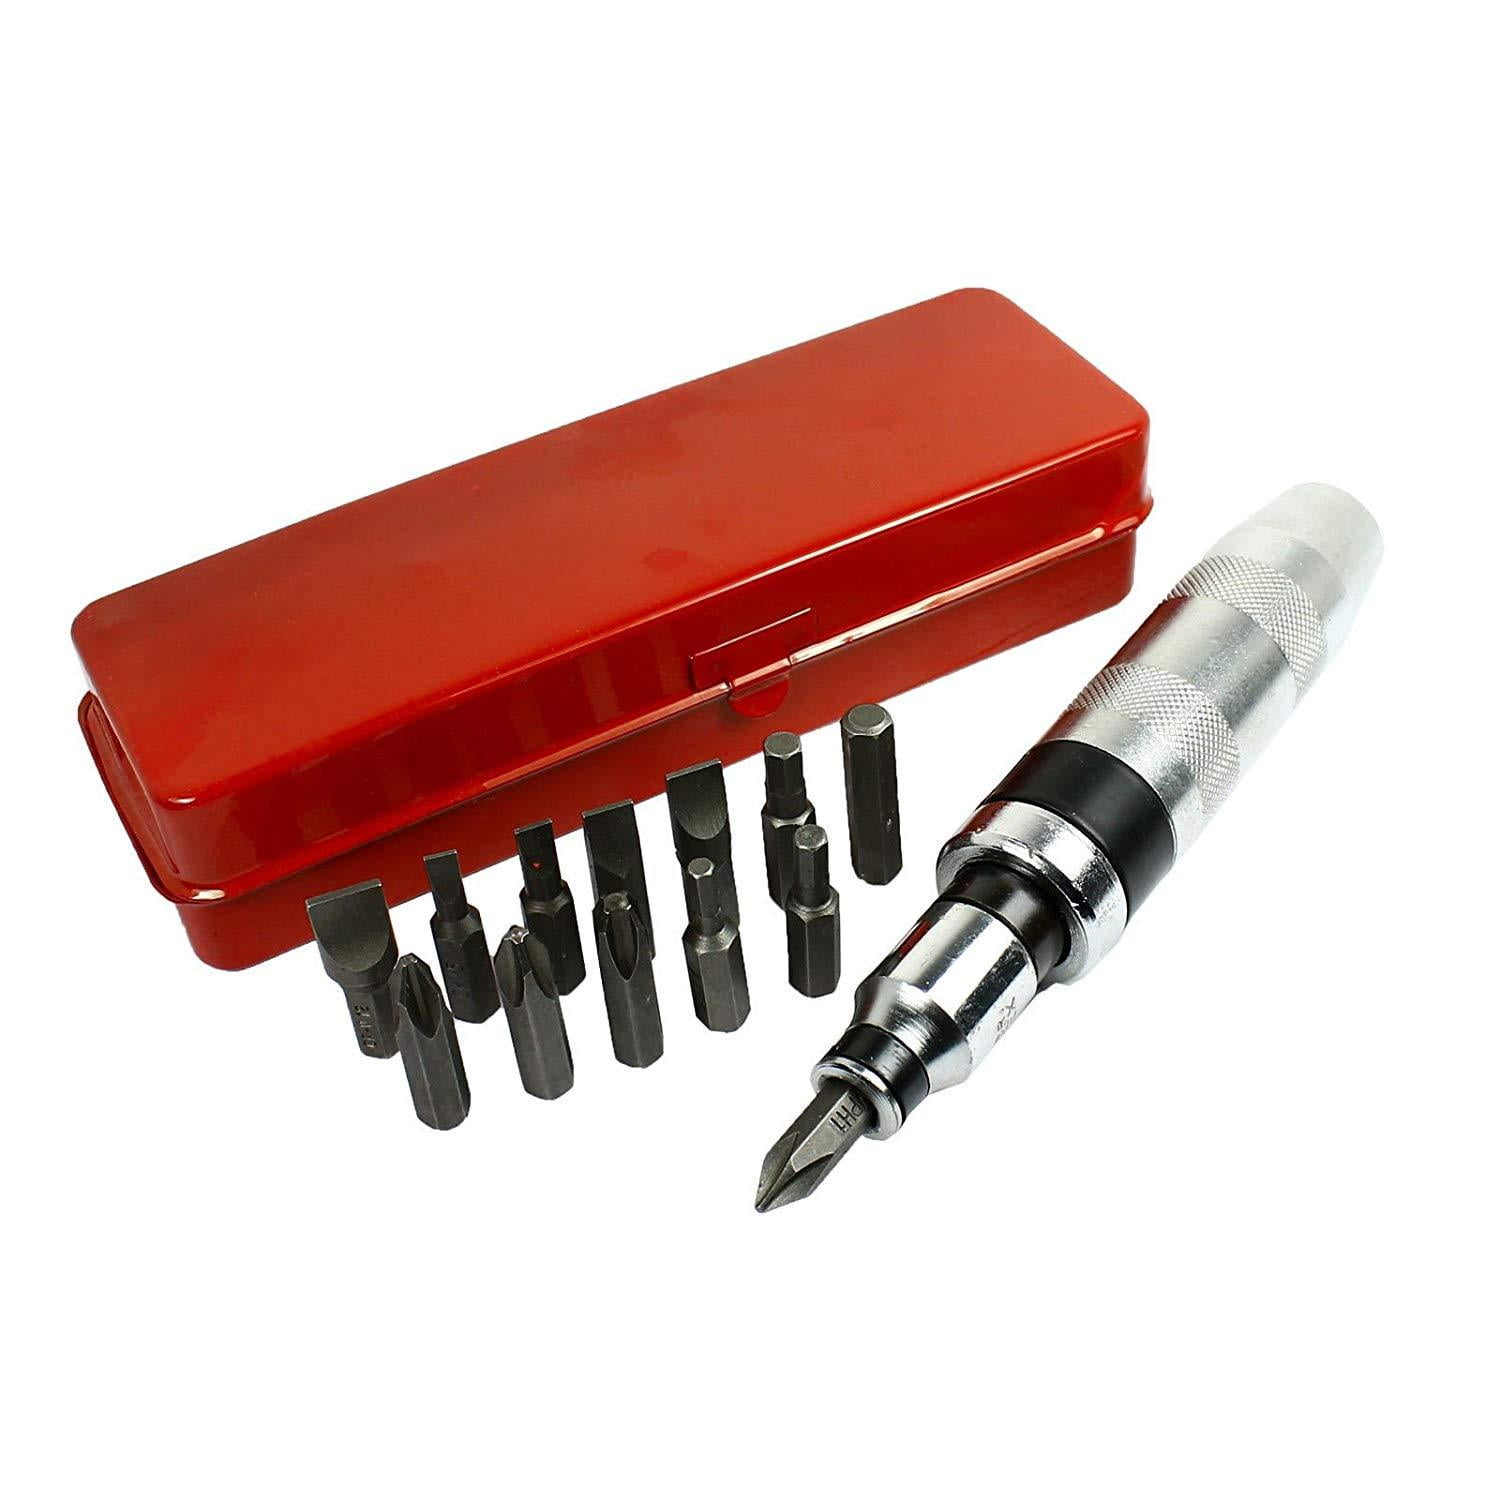 Penck 5/16 Drive Manual Reversible Impact Screwdriver Set Rusted Fasteners Disengage Brake Caliper Screws or Frozen Bolts Comes with 12 Bits Cover Most Common Applications